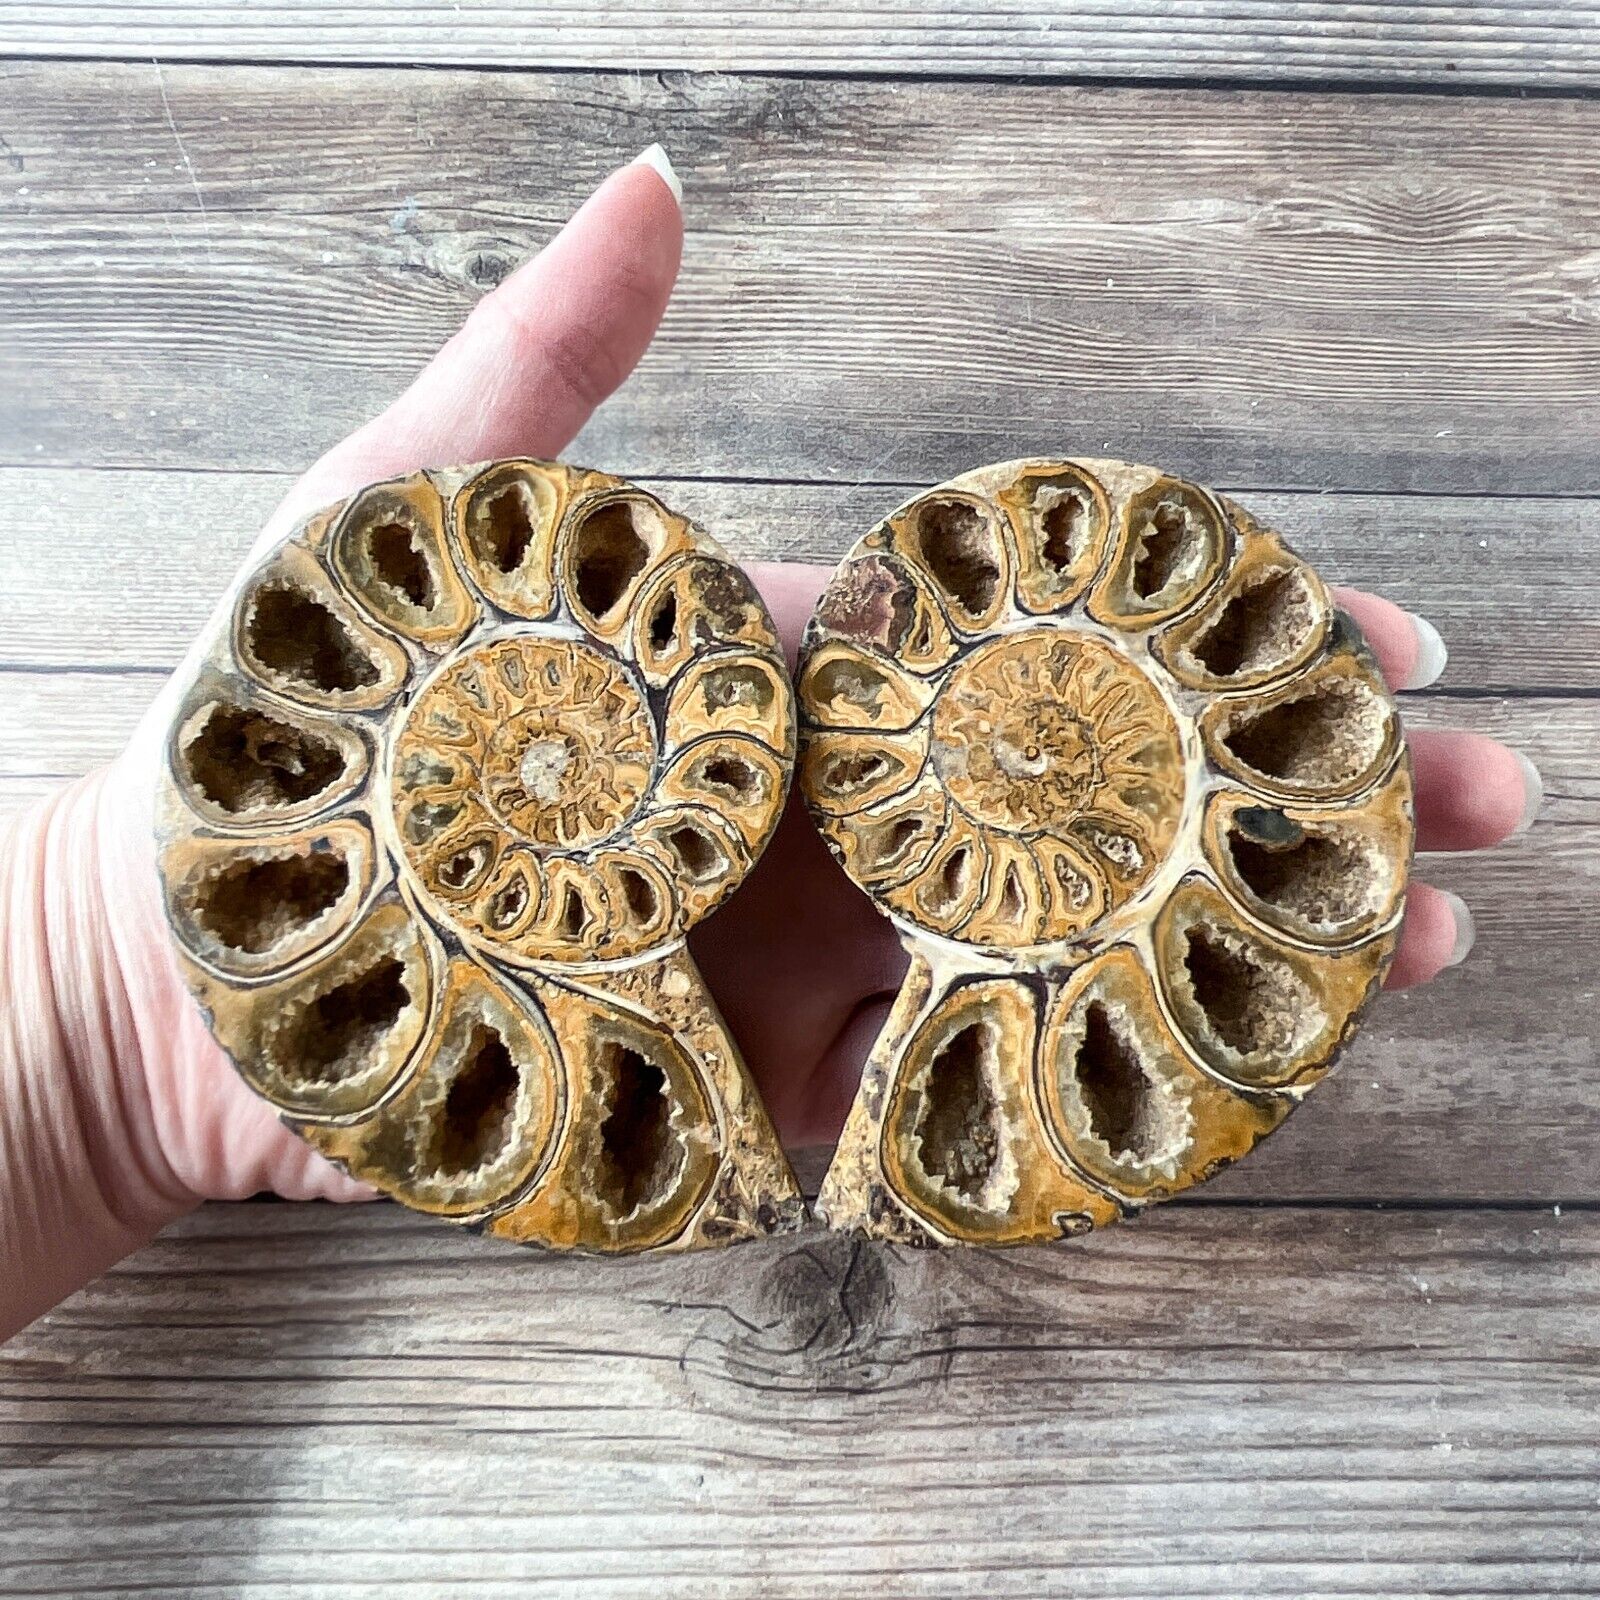 Ammonite Fossil Pair with Calcite Chambers 232g, Polished